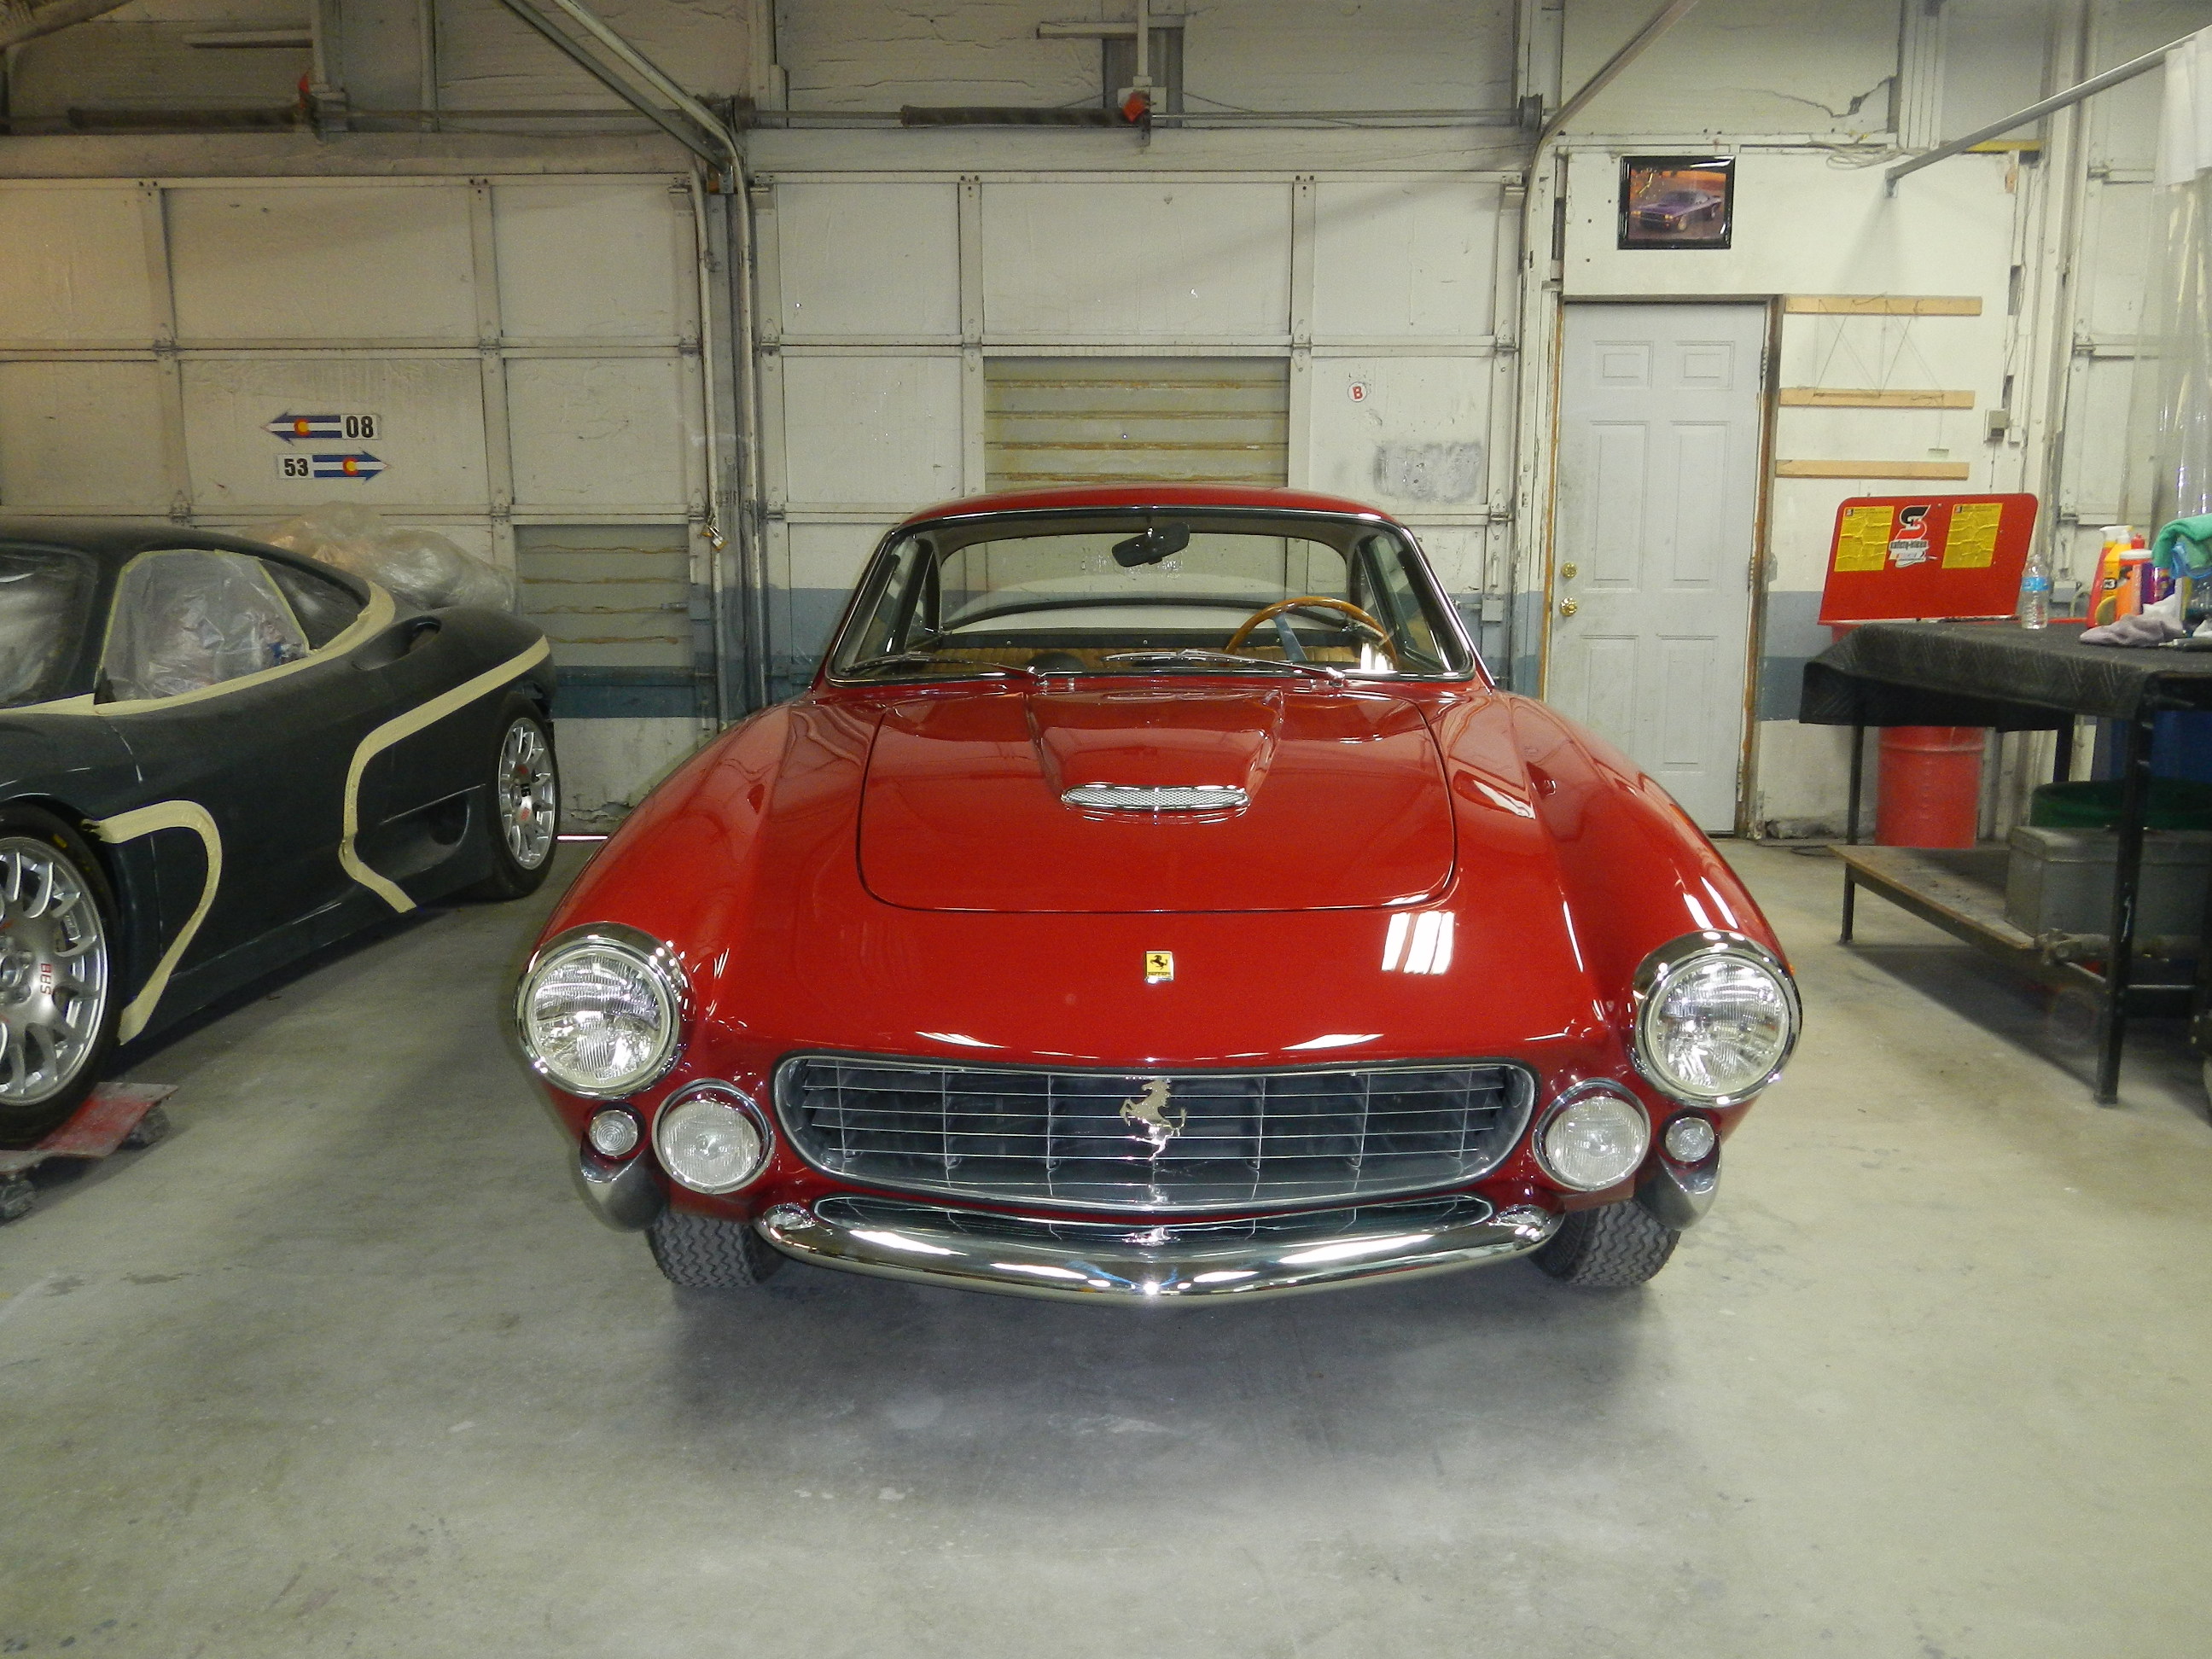 62 Ferrari Lusso 250 GT after picture